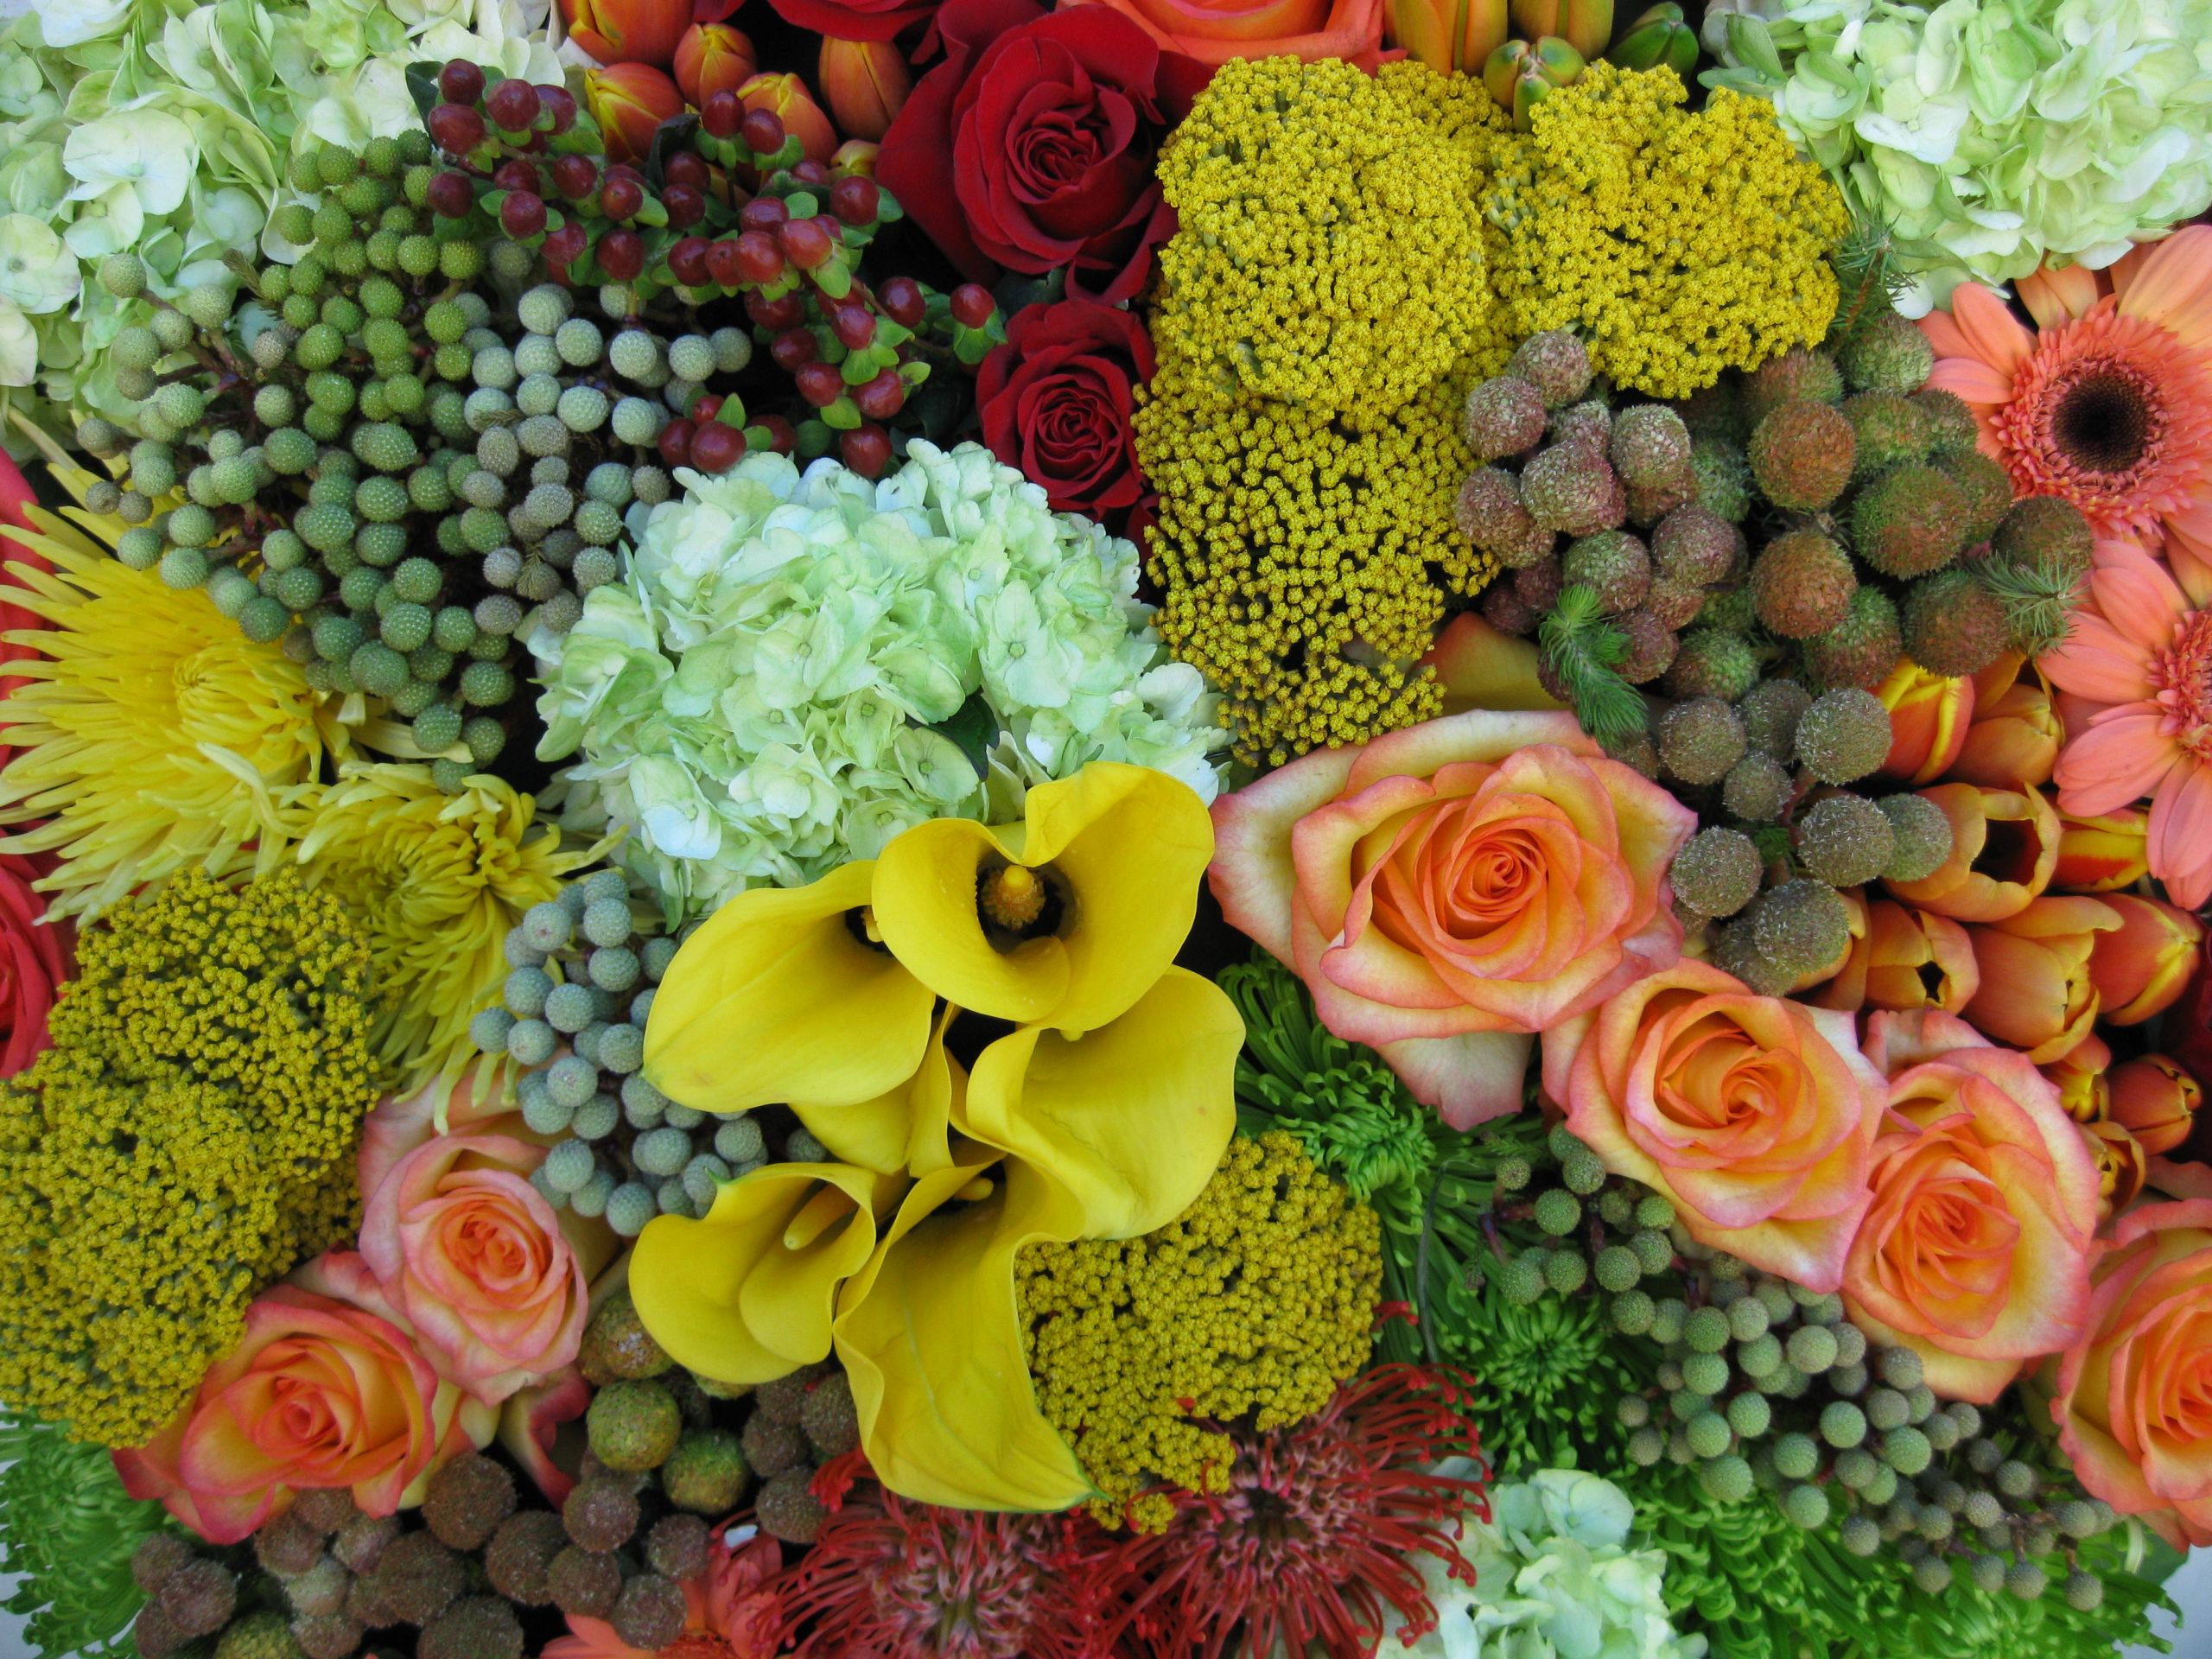 Thanksgiving Flower Delivery
 What is Thanksgiving without family food flowers and a